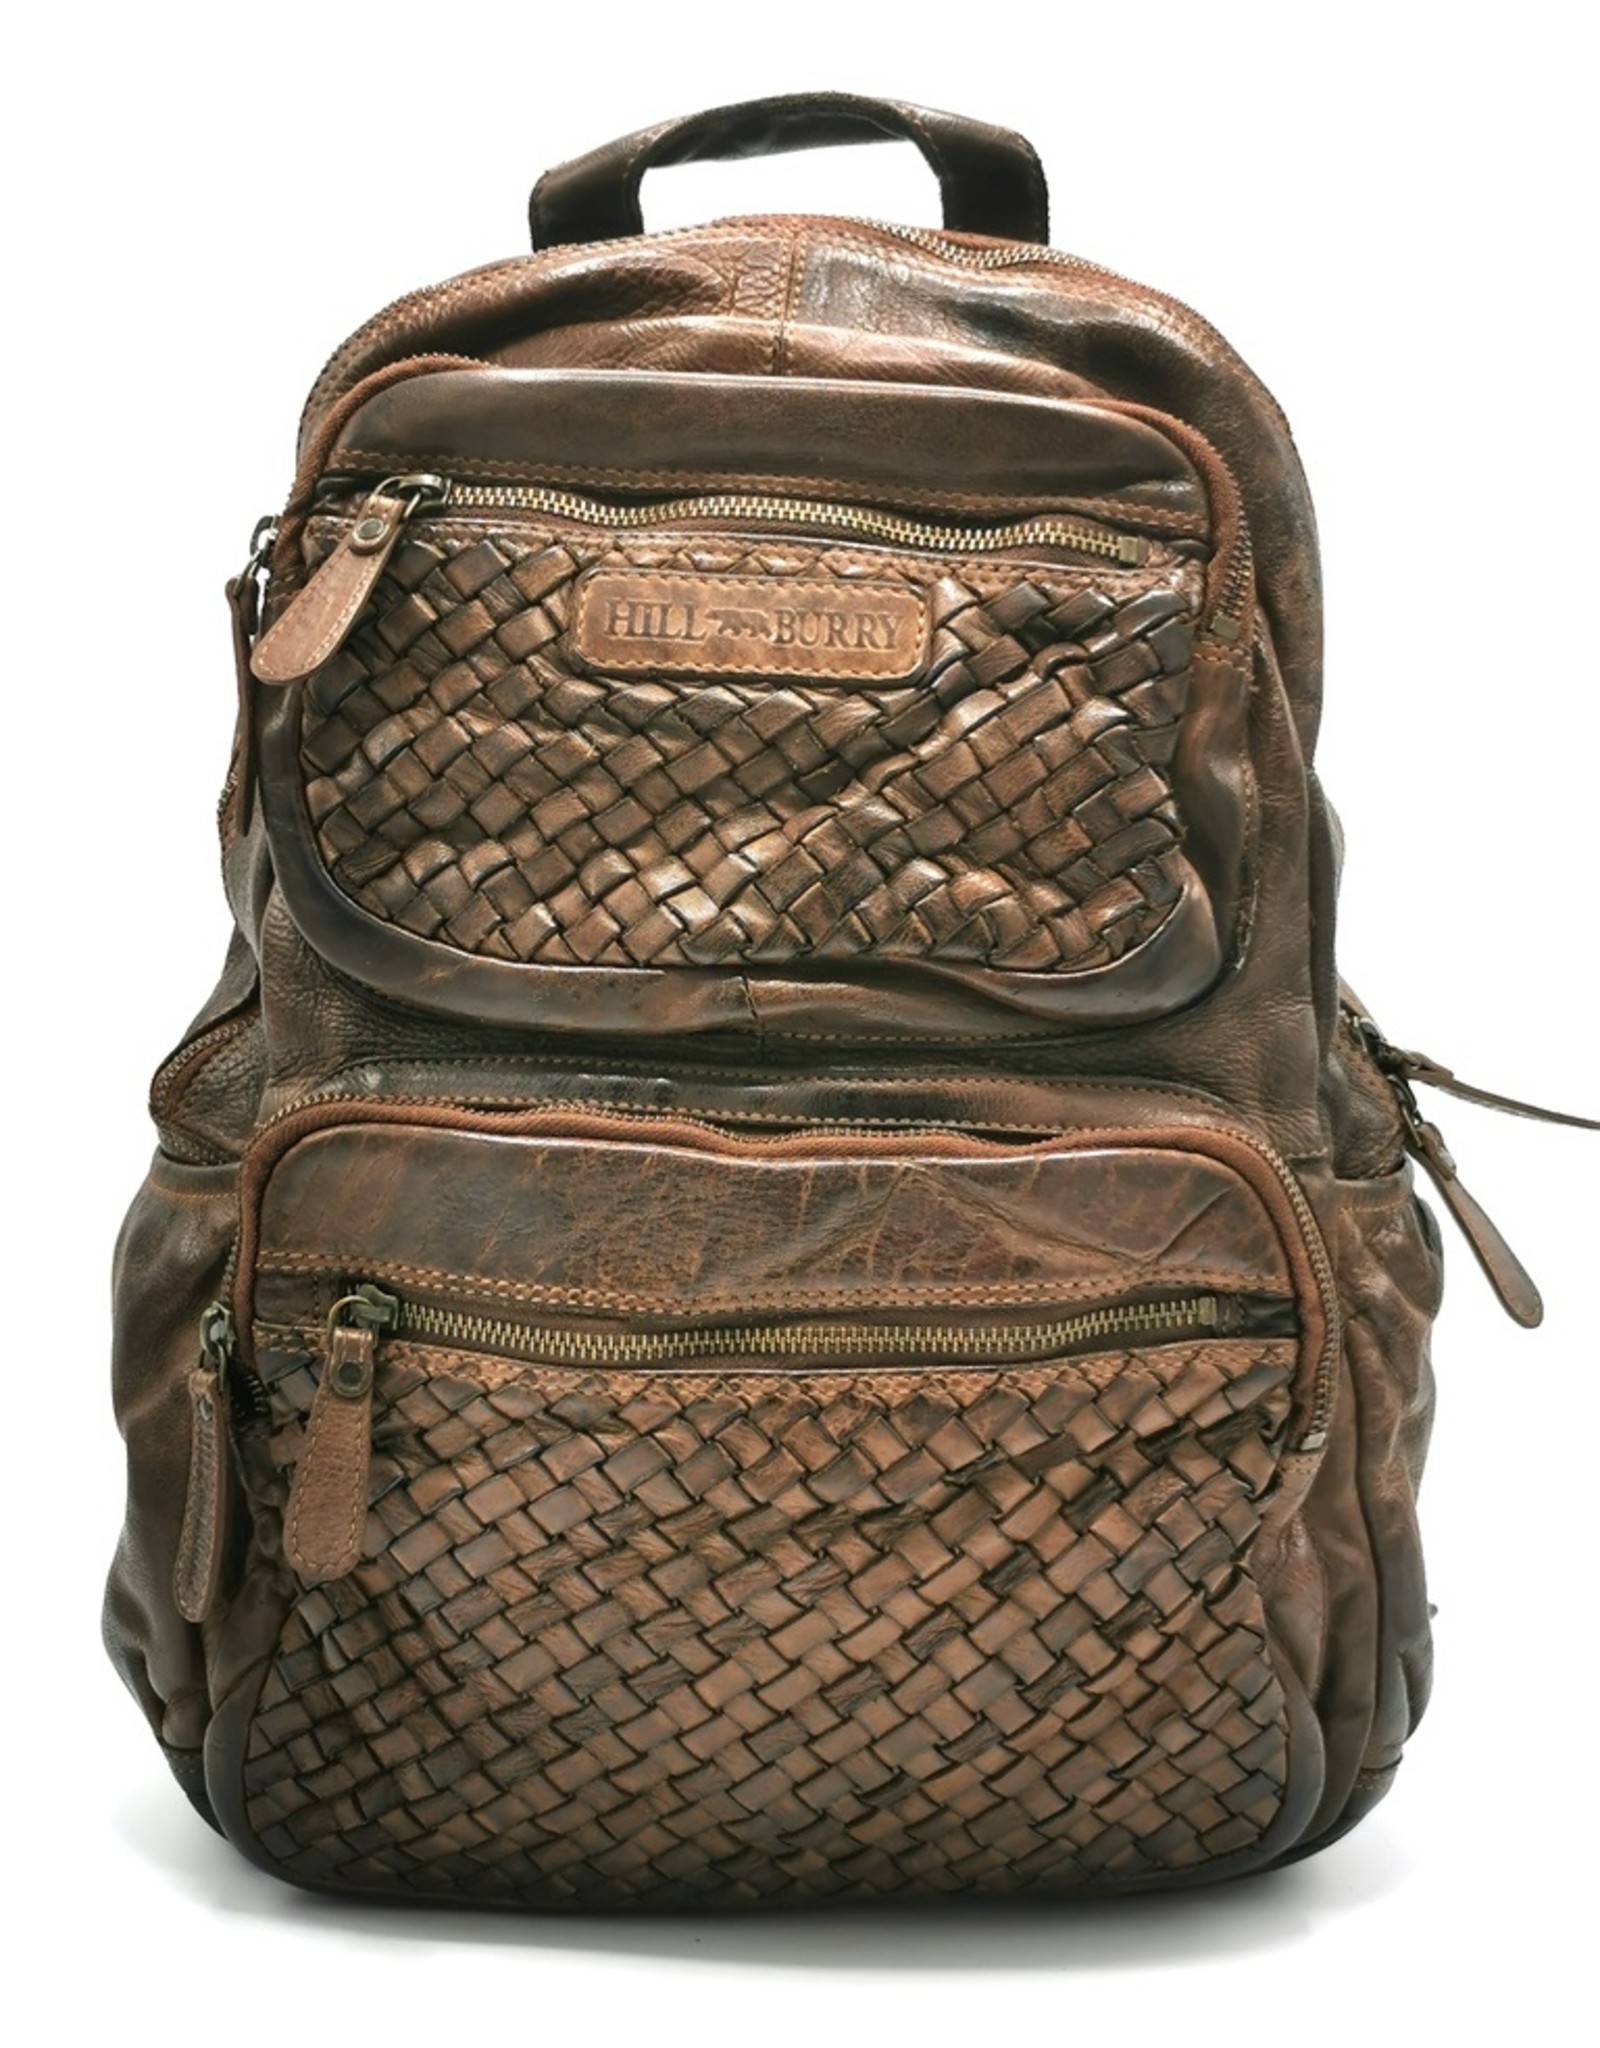 HillBurry Leather backpacks Leather shoppers - HillBurry Luxury Backpack with Wicker Washed Leather Brown